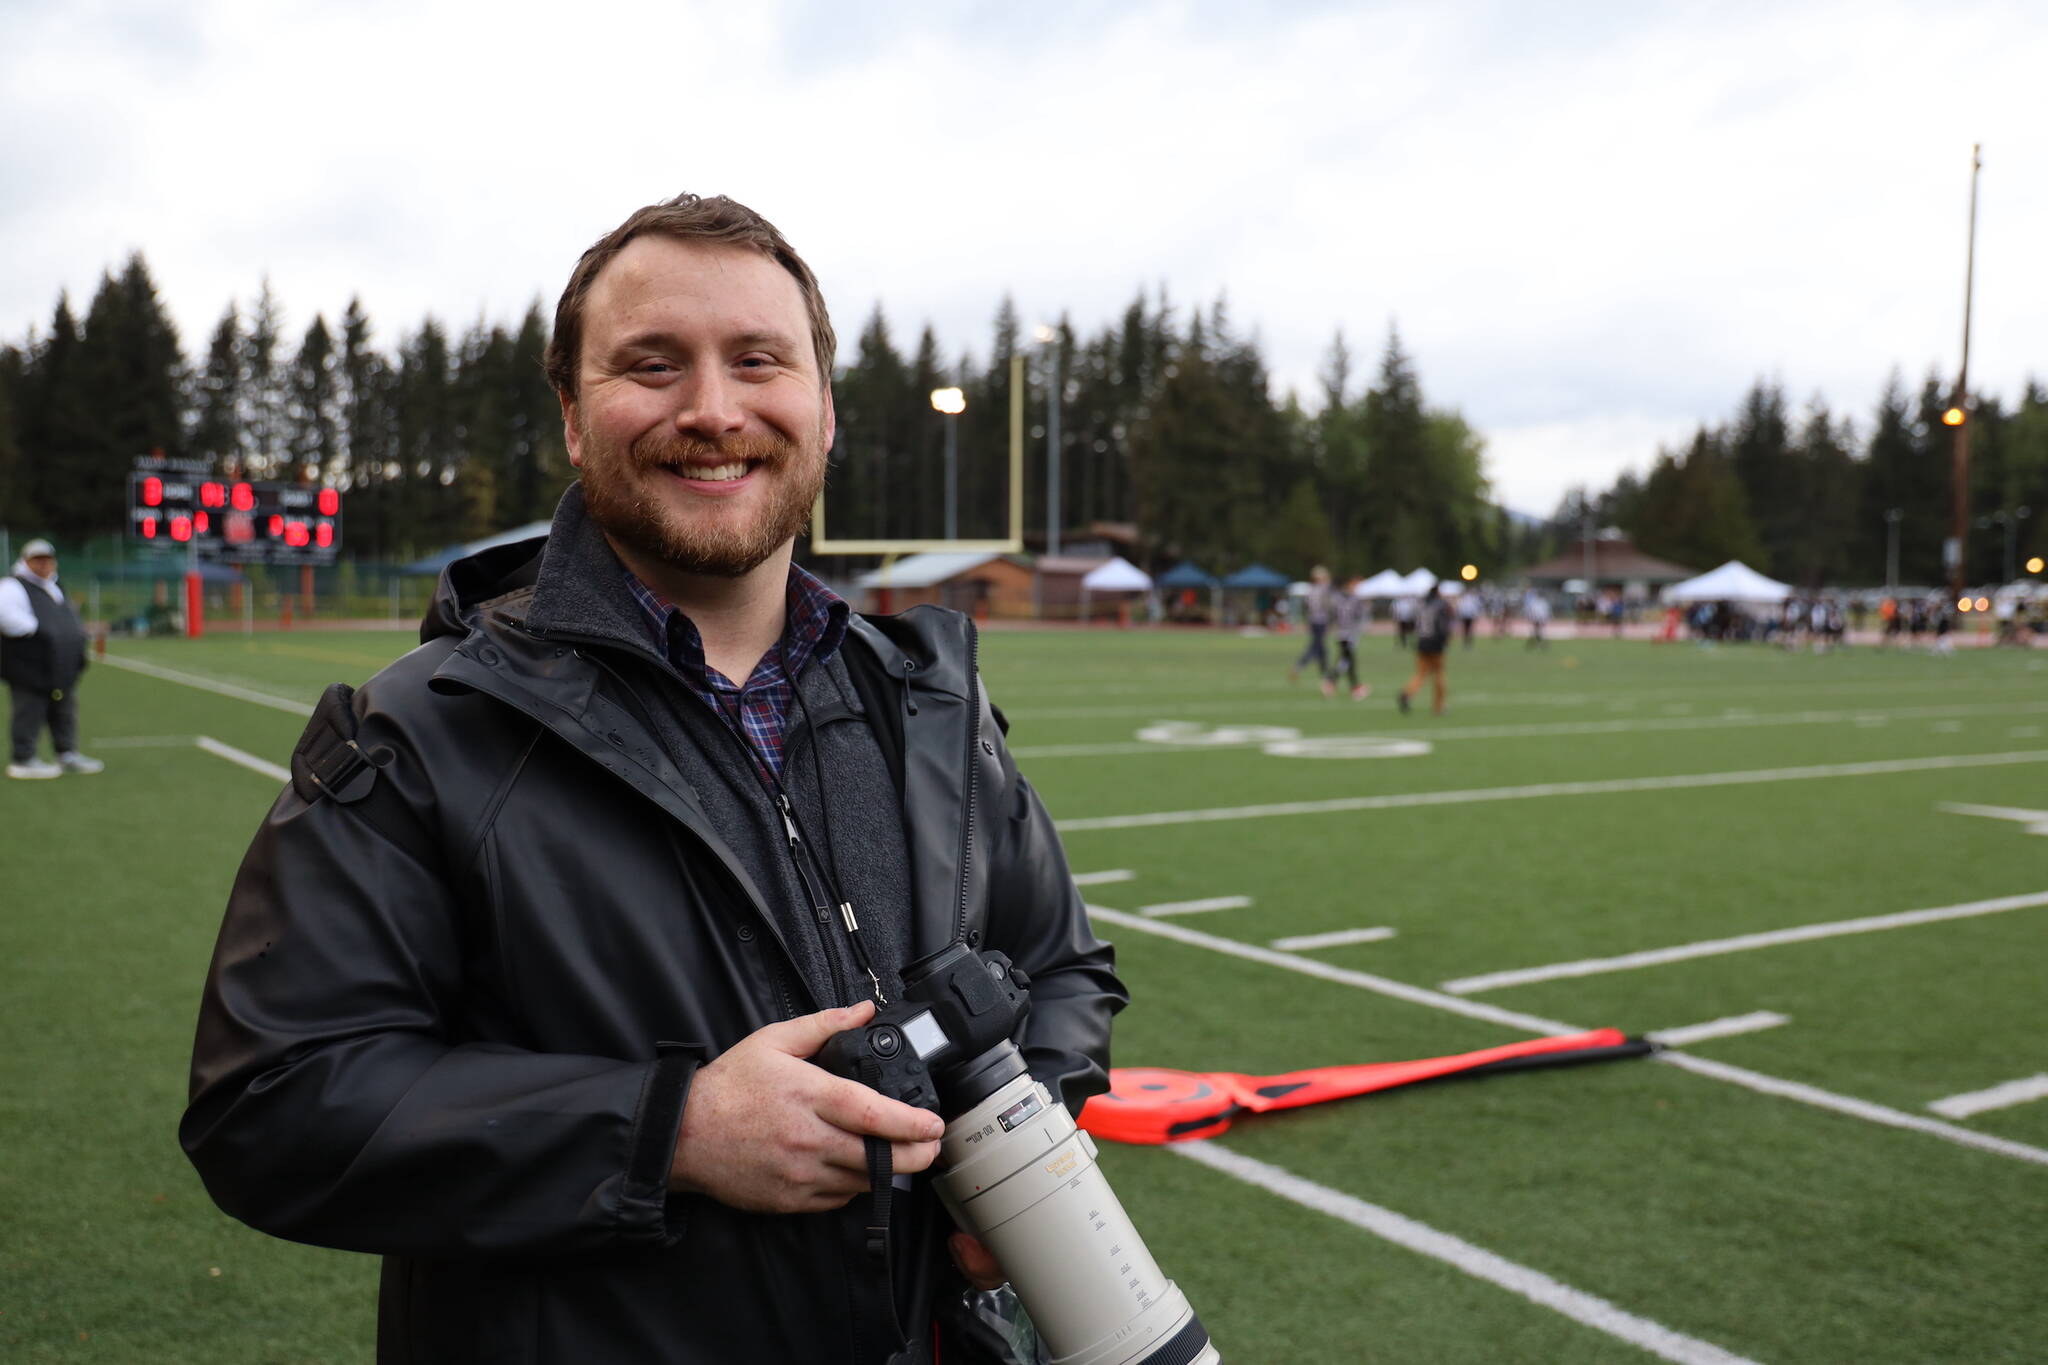 Juneau Empire Managing Editor Ben Hohenstatt takes photos at the Juneau Alumni Football game on Friday at Adair-Kennedy Memorial Park. Hohenstatt is departing after five years to accept a job with the Alaska State Ombudsman. (Clarise Larson / Juneau Empire)